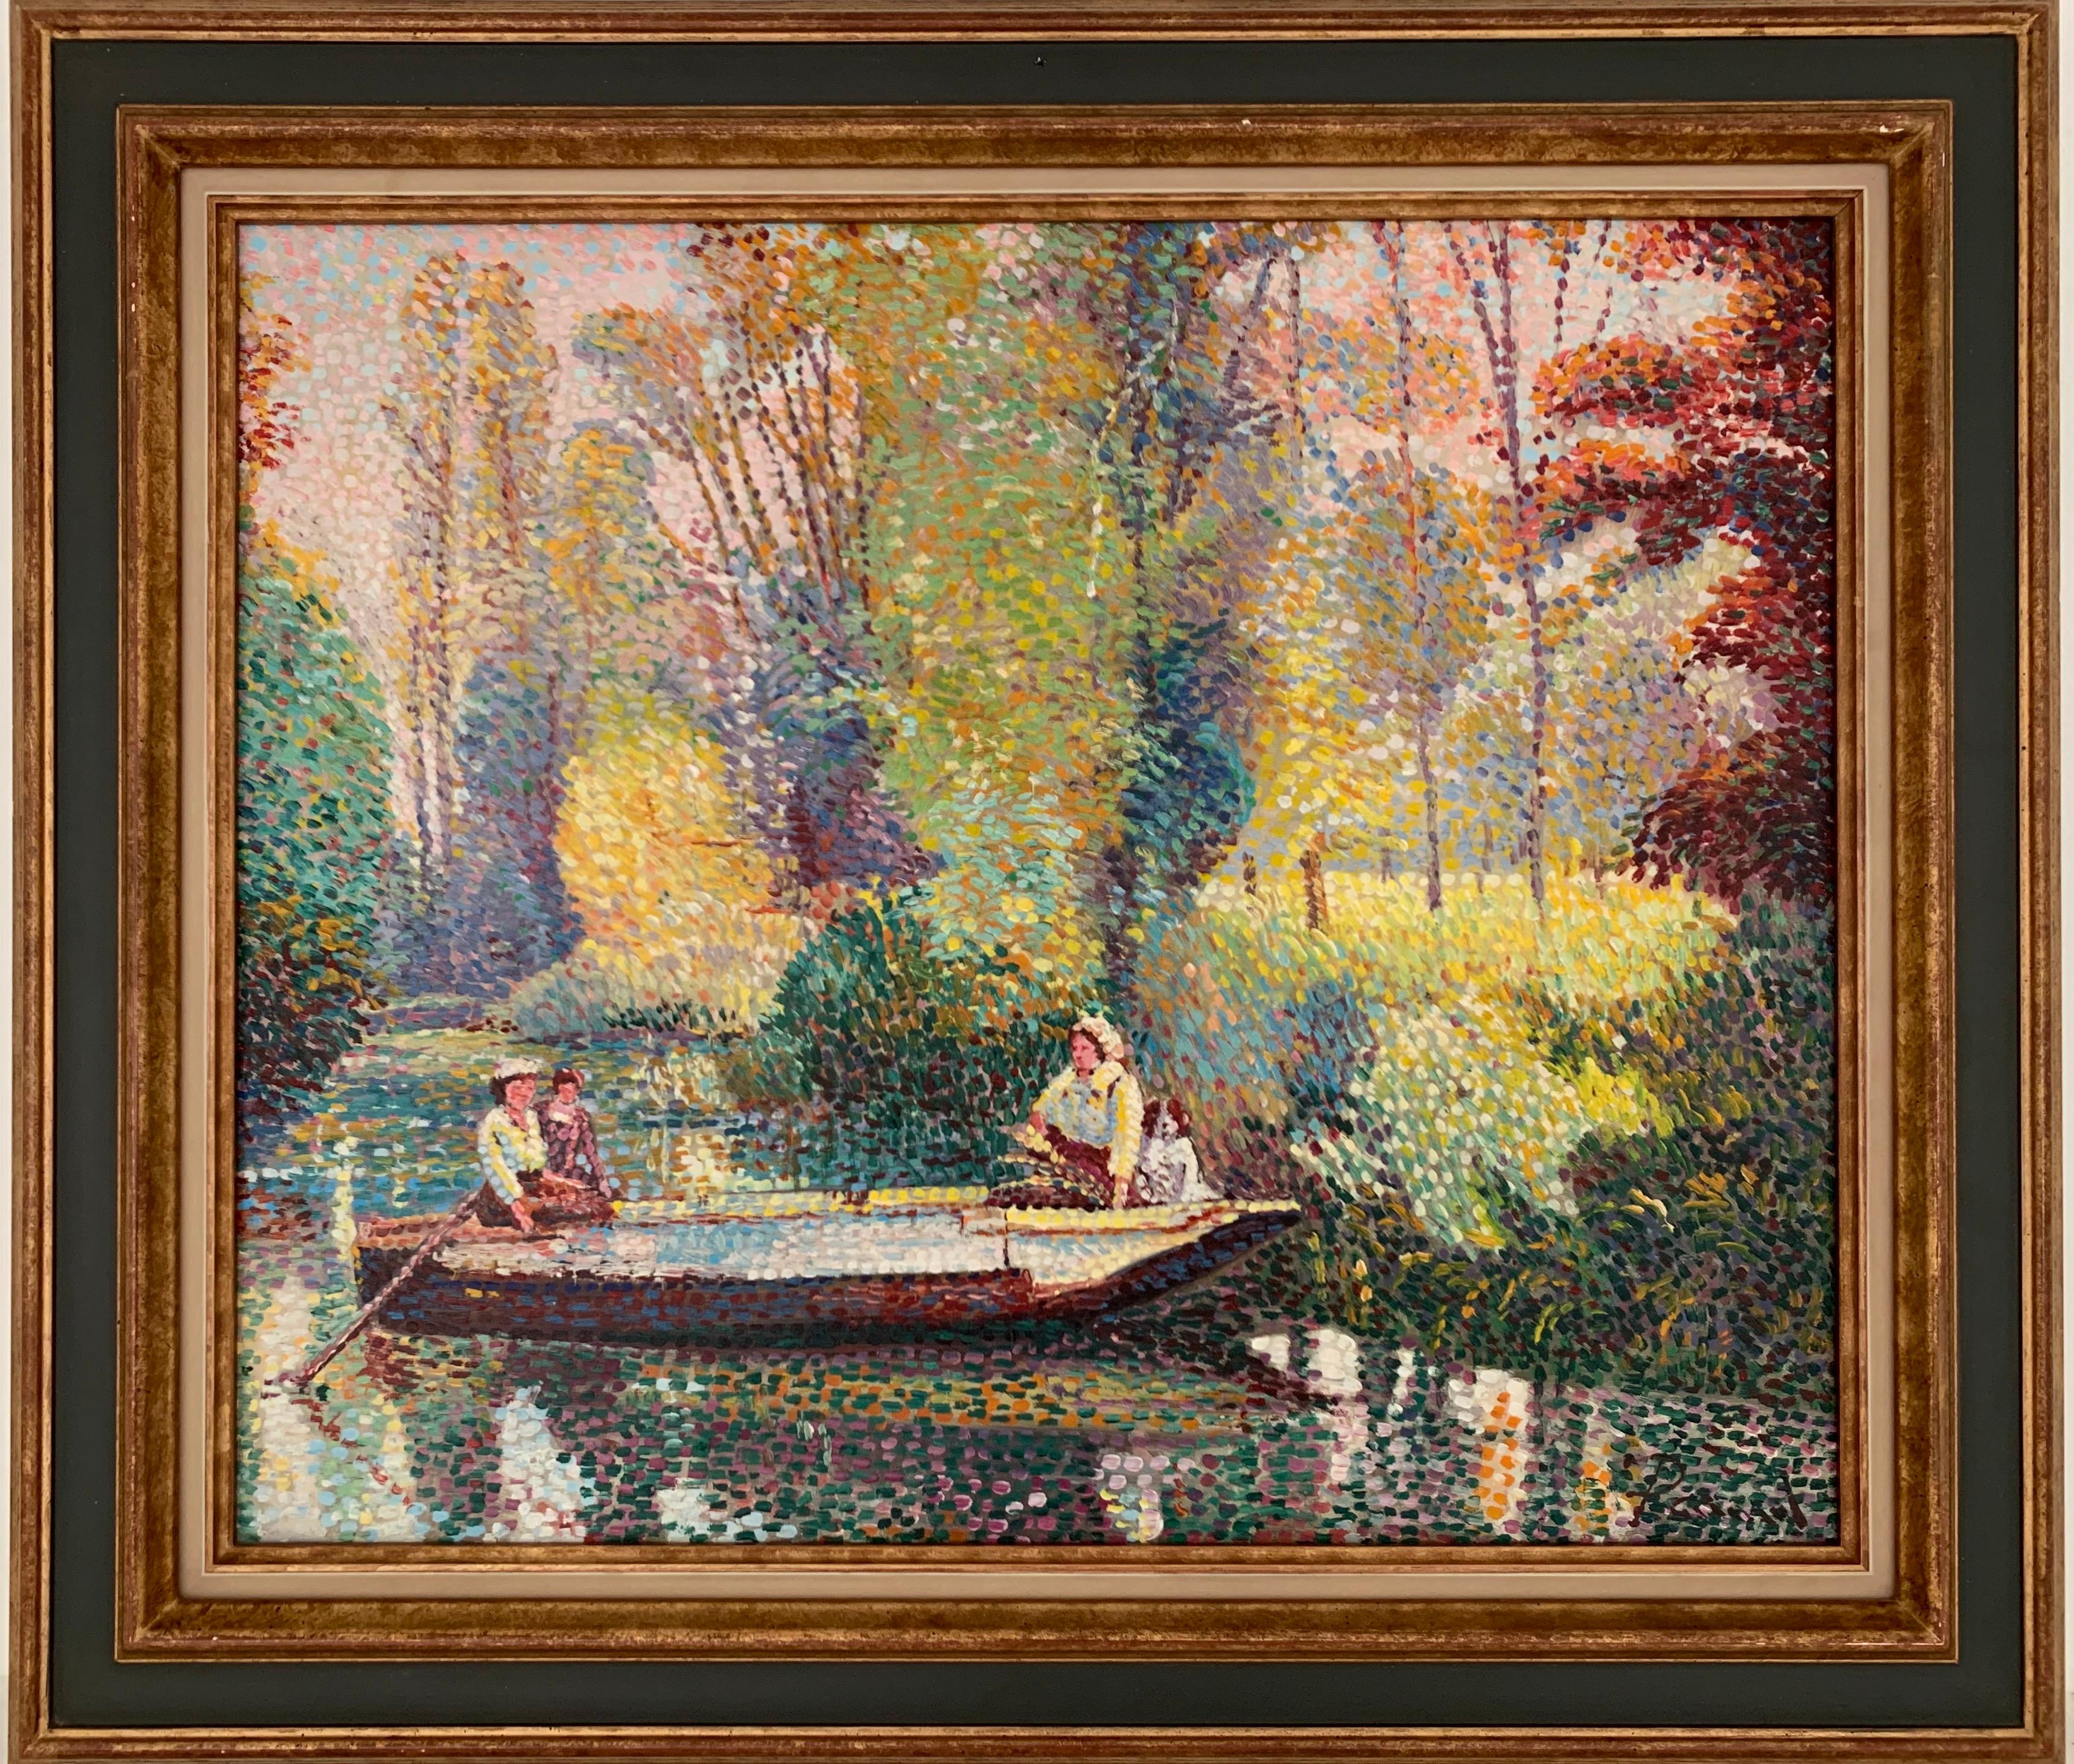 Girard Landscape Painting - French Pointillist Signed Oil Painting Figures on River in Wooden Punt Landscape